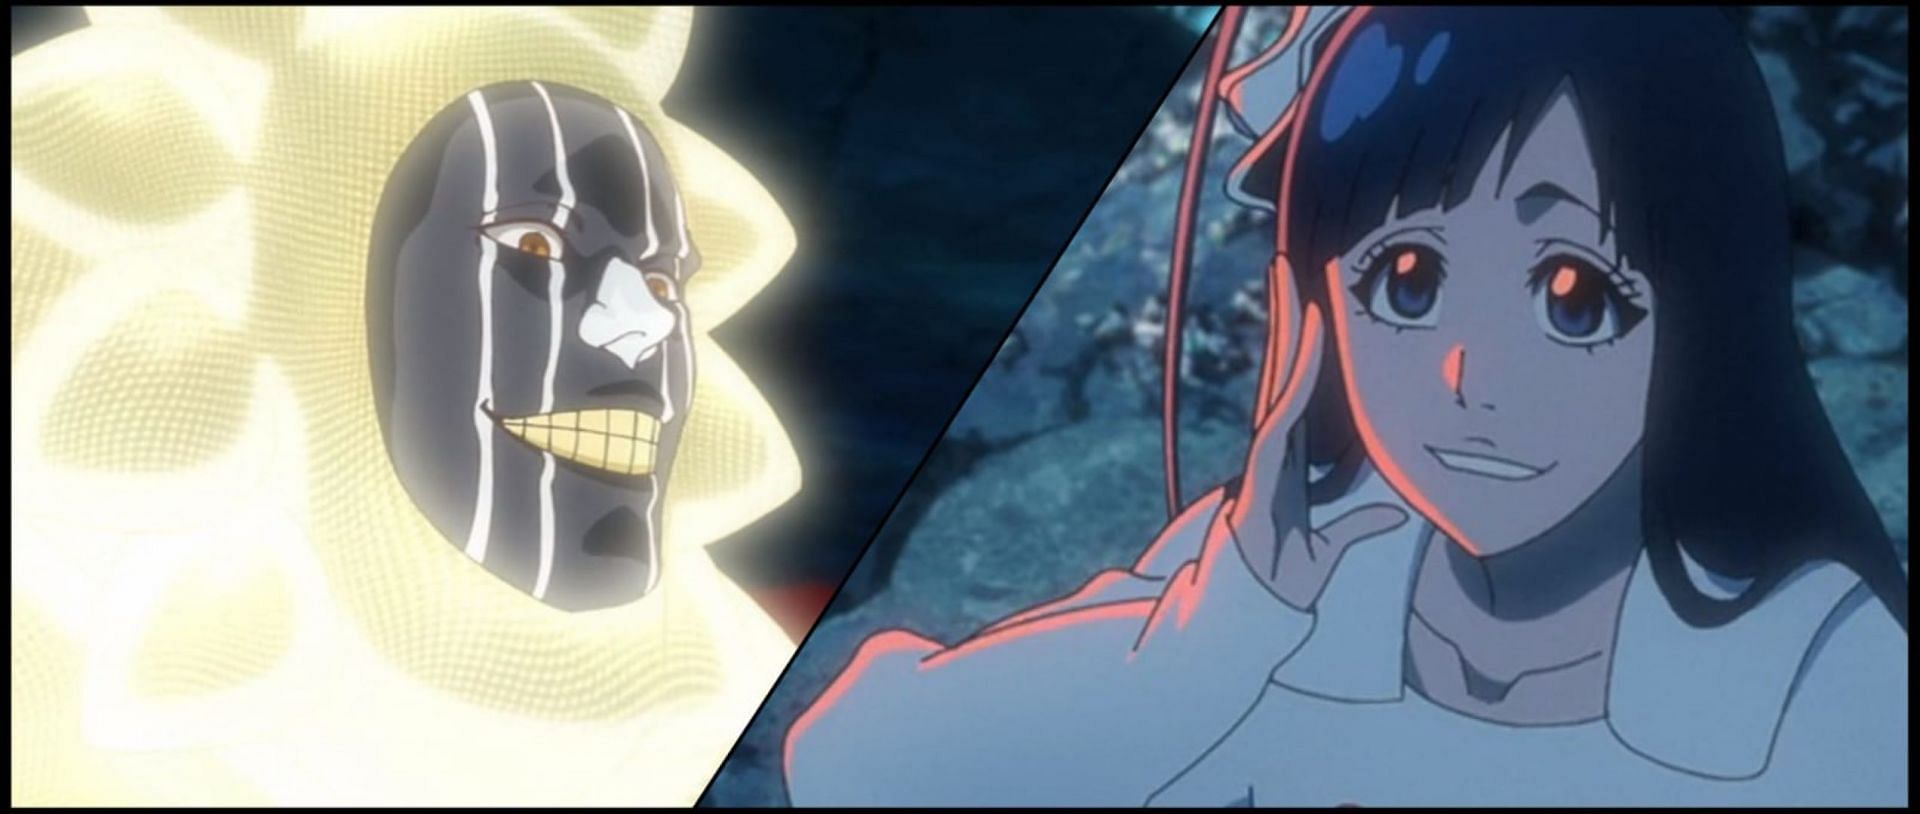 Bleach TYBW episode 22: Yoruichi returns to the Seireitei as Mayuri joins  the battlefield and outsmarts Giselle